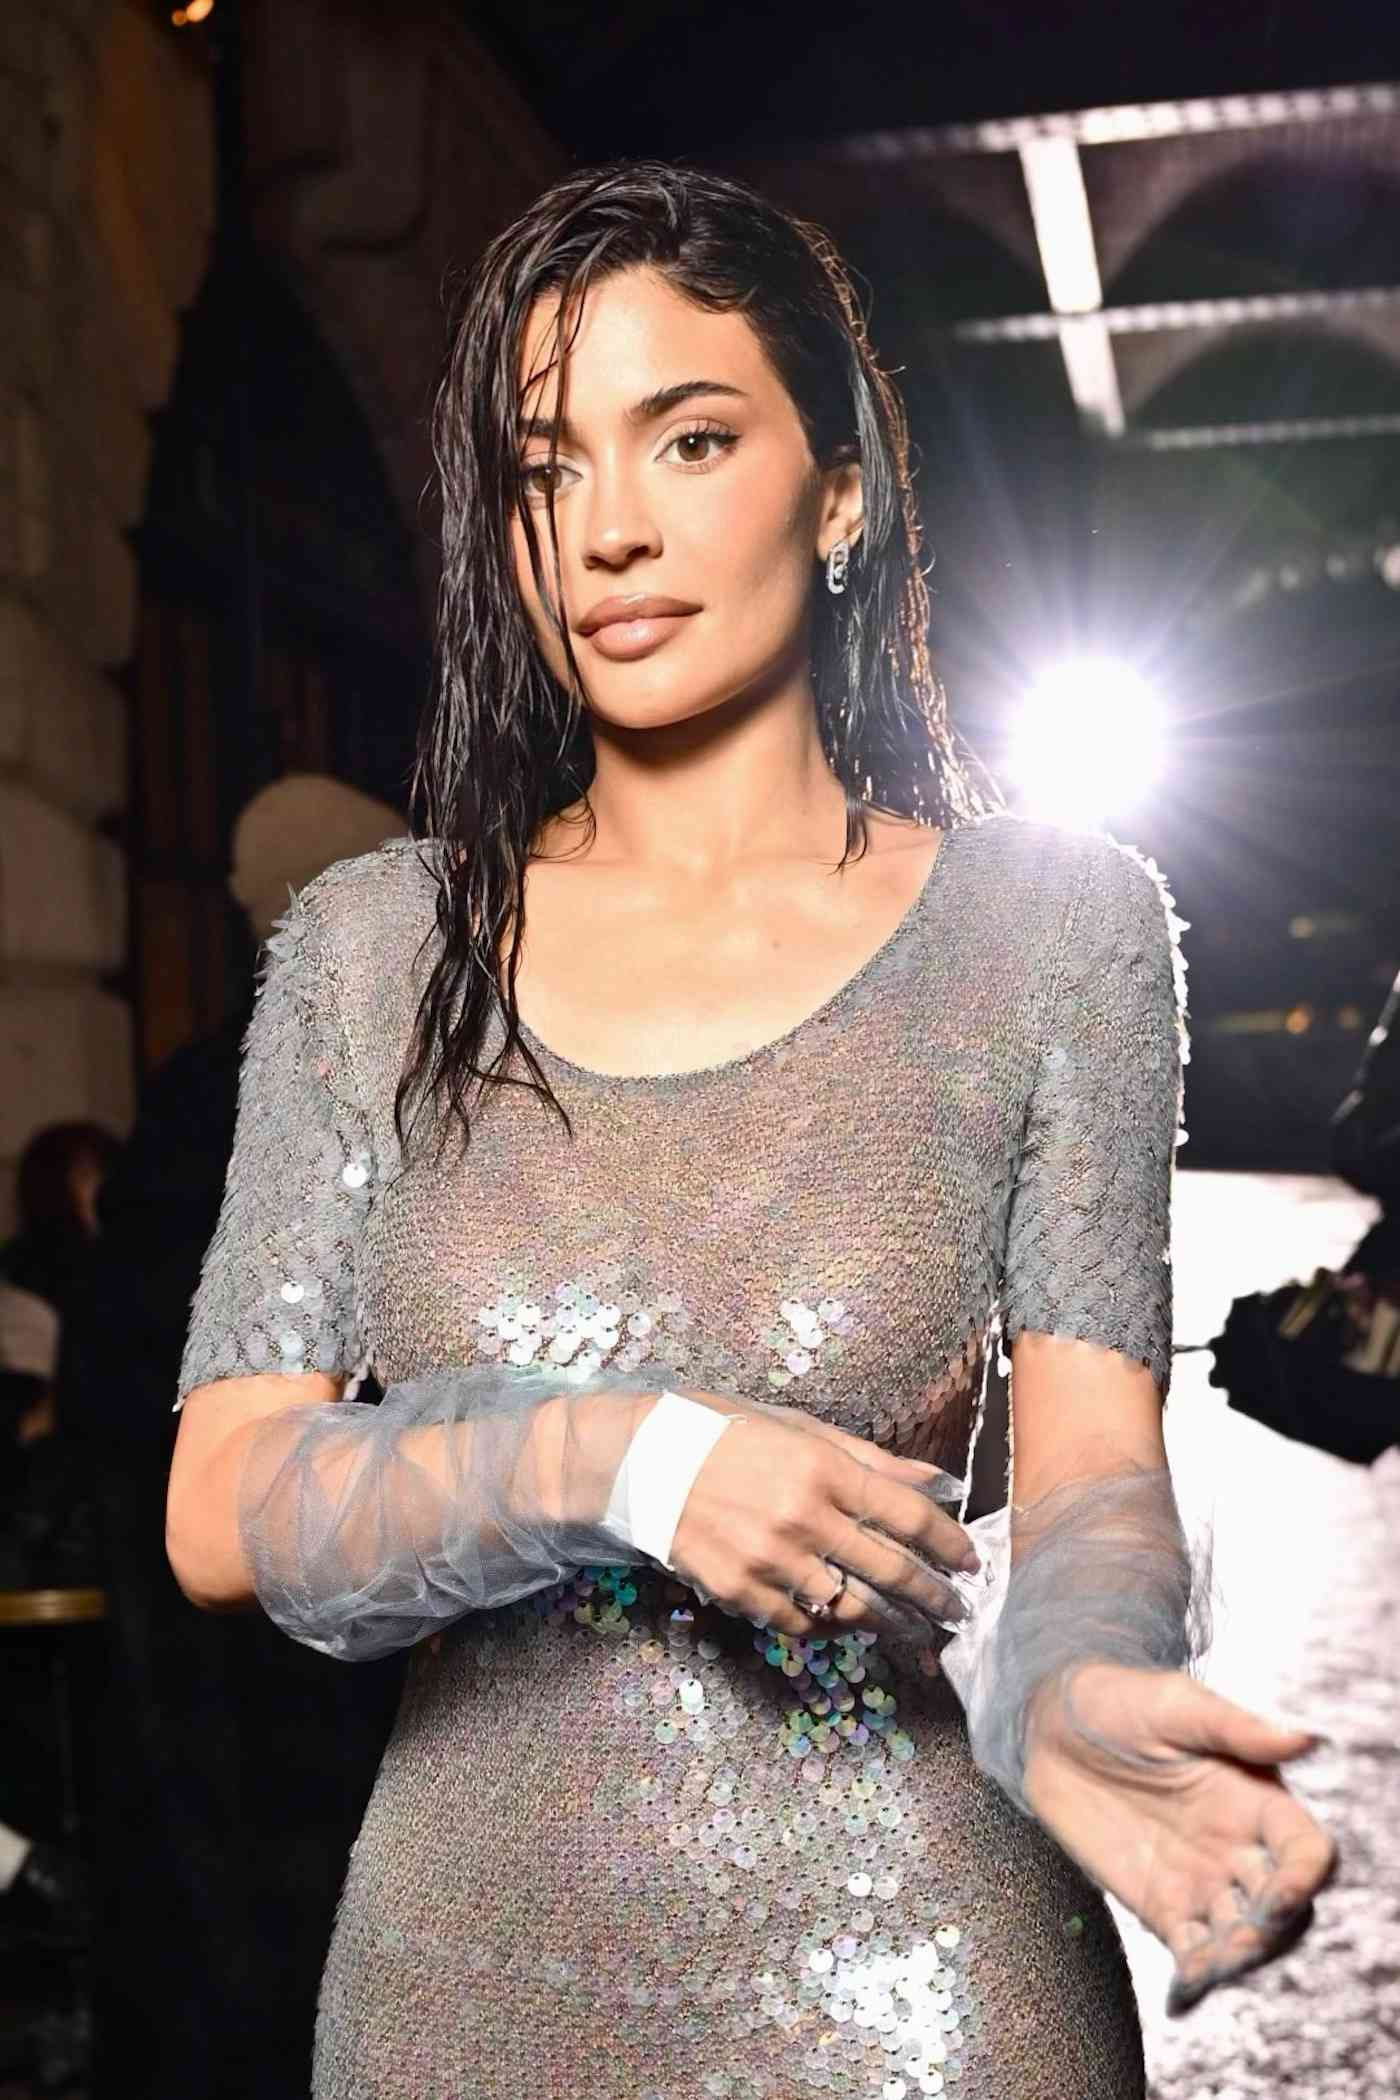 Kylie Jenners wet hair moment takes Paris by storm